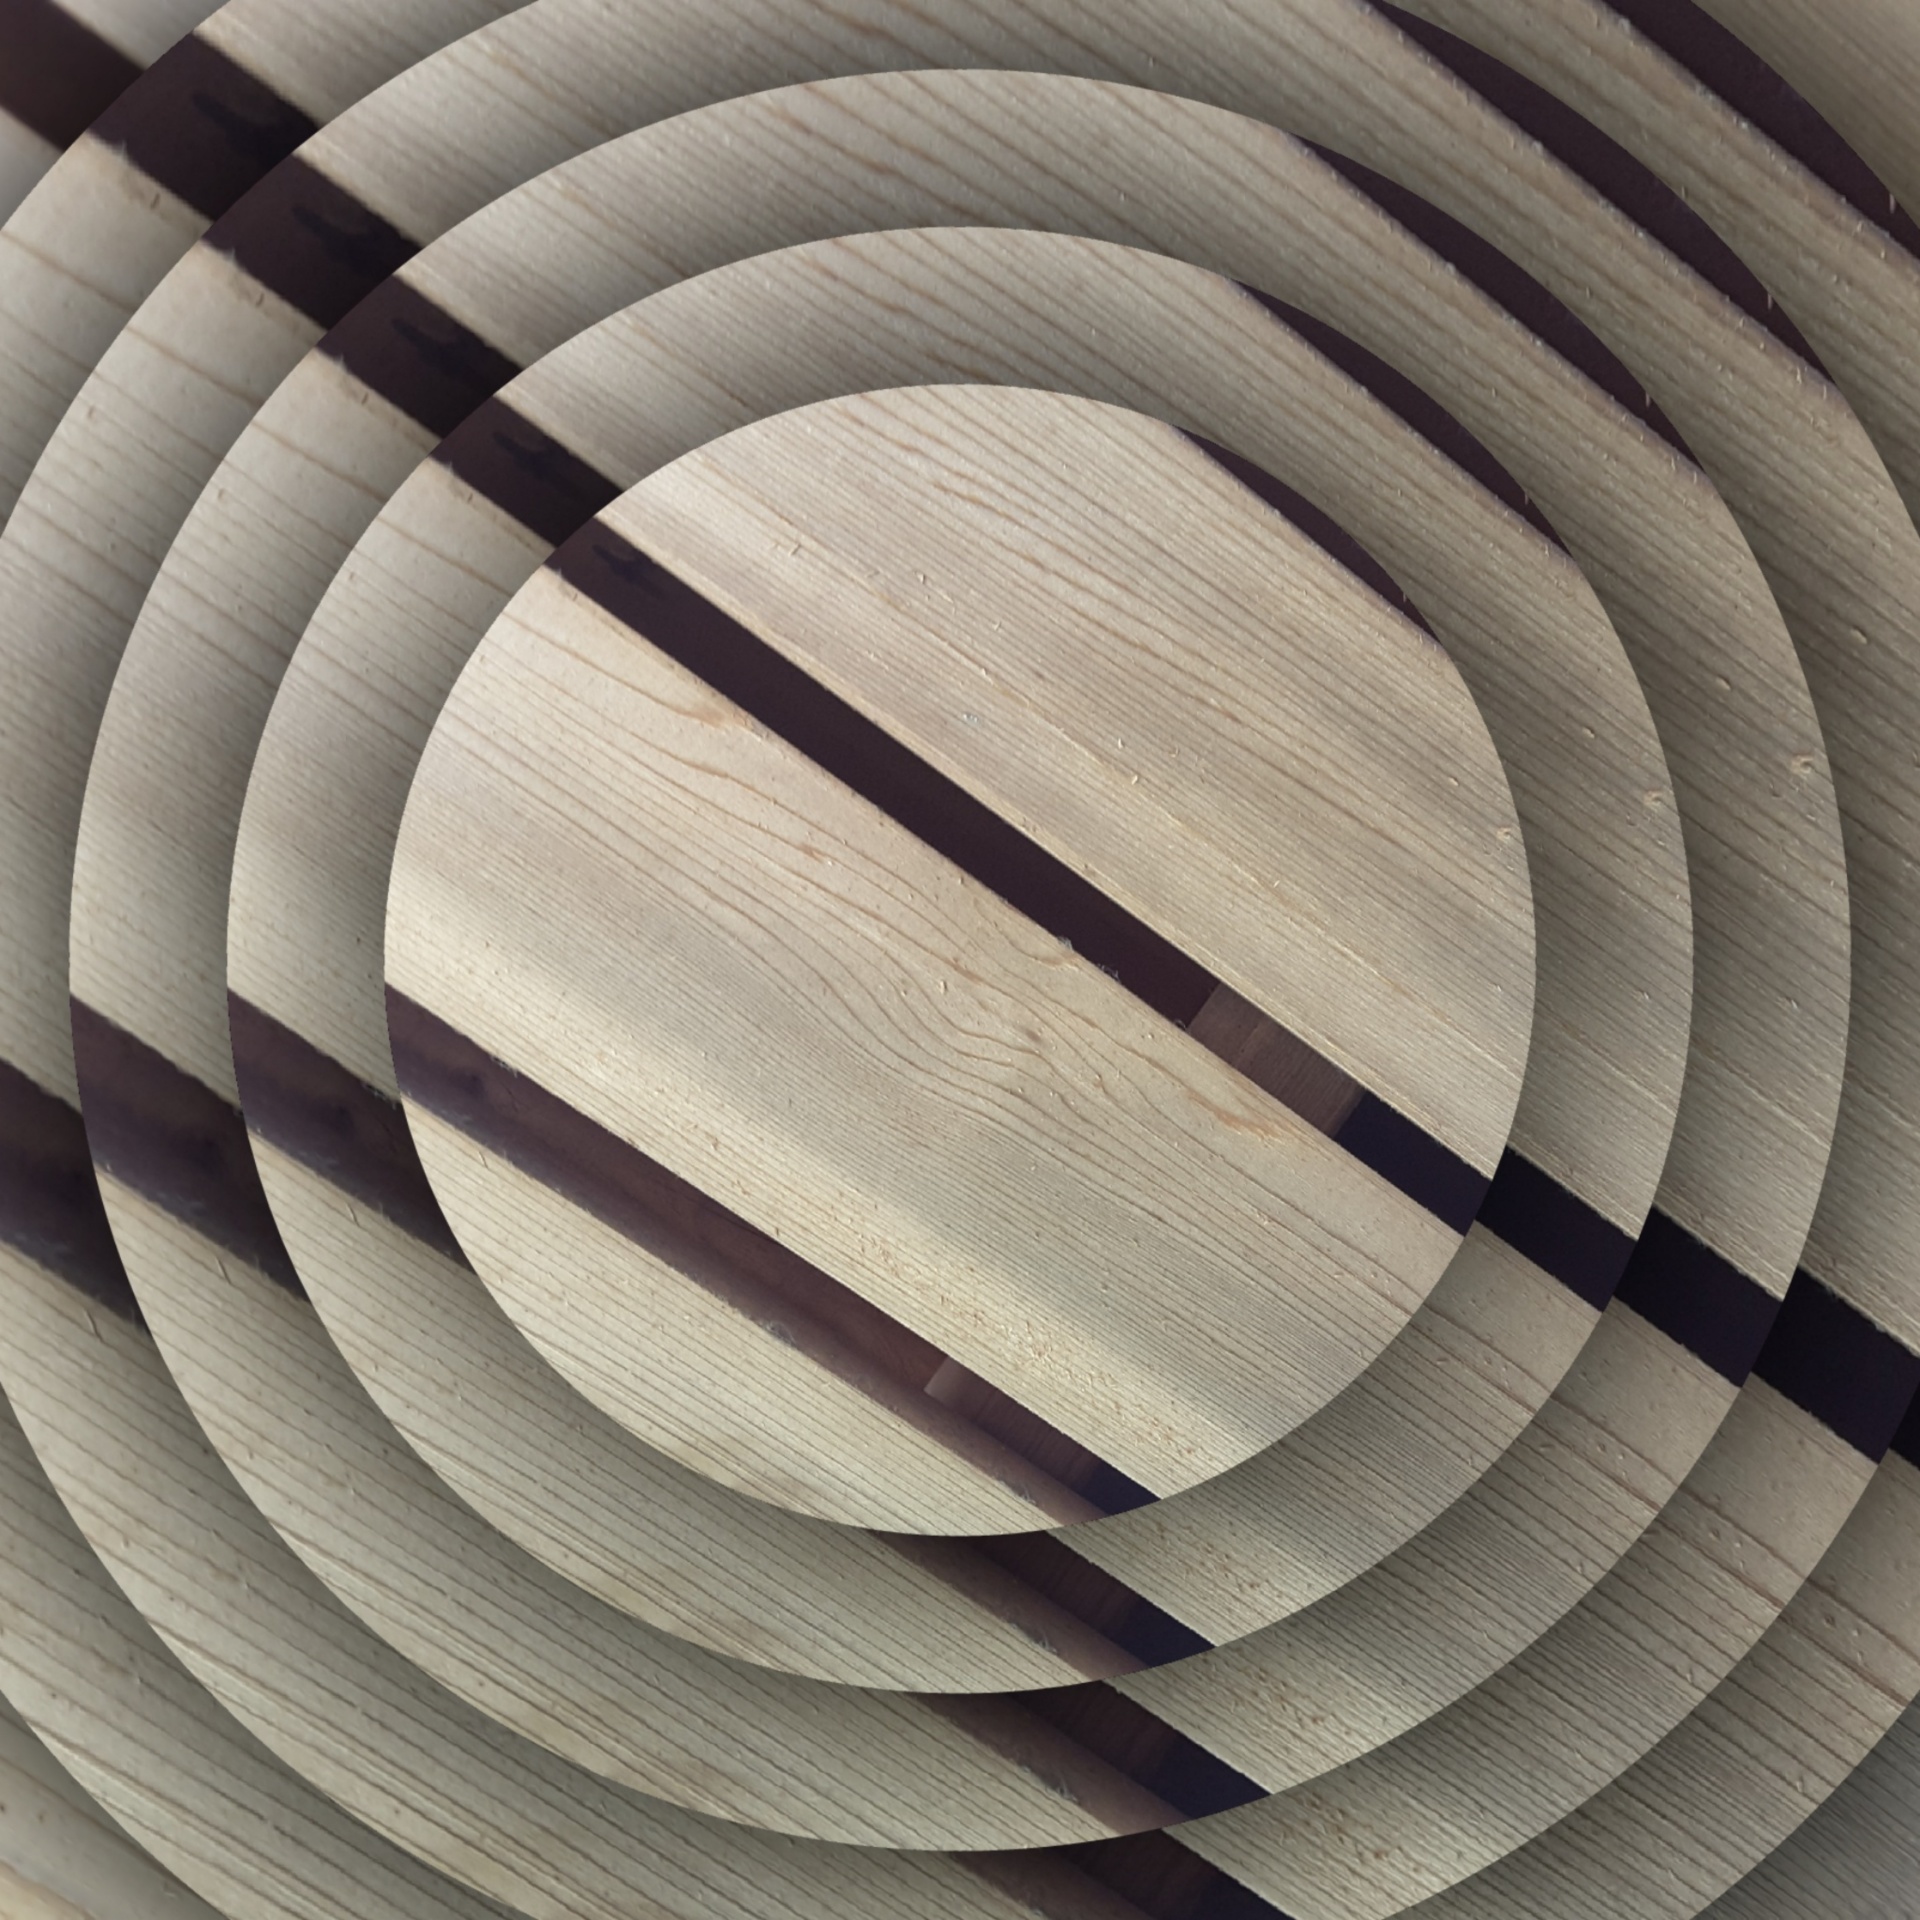 wallpaper concentric wooden free photo